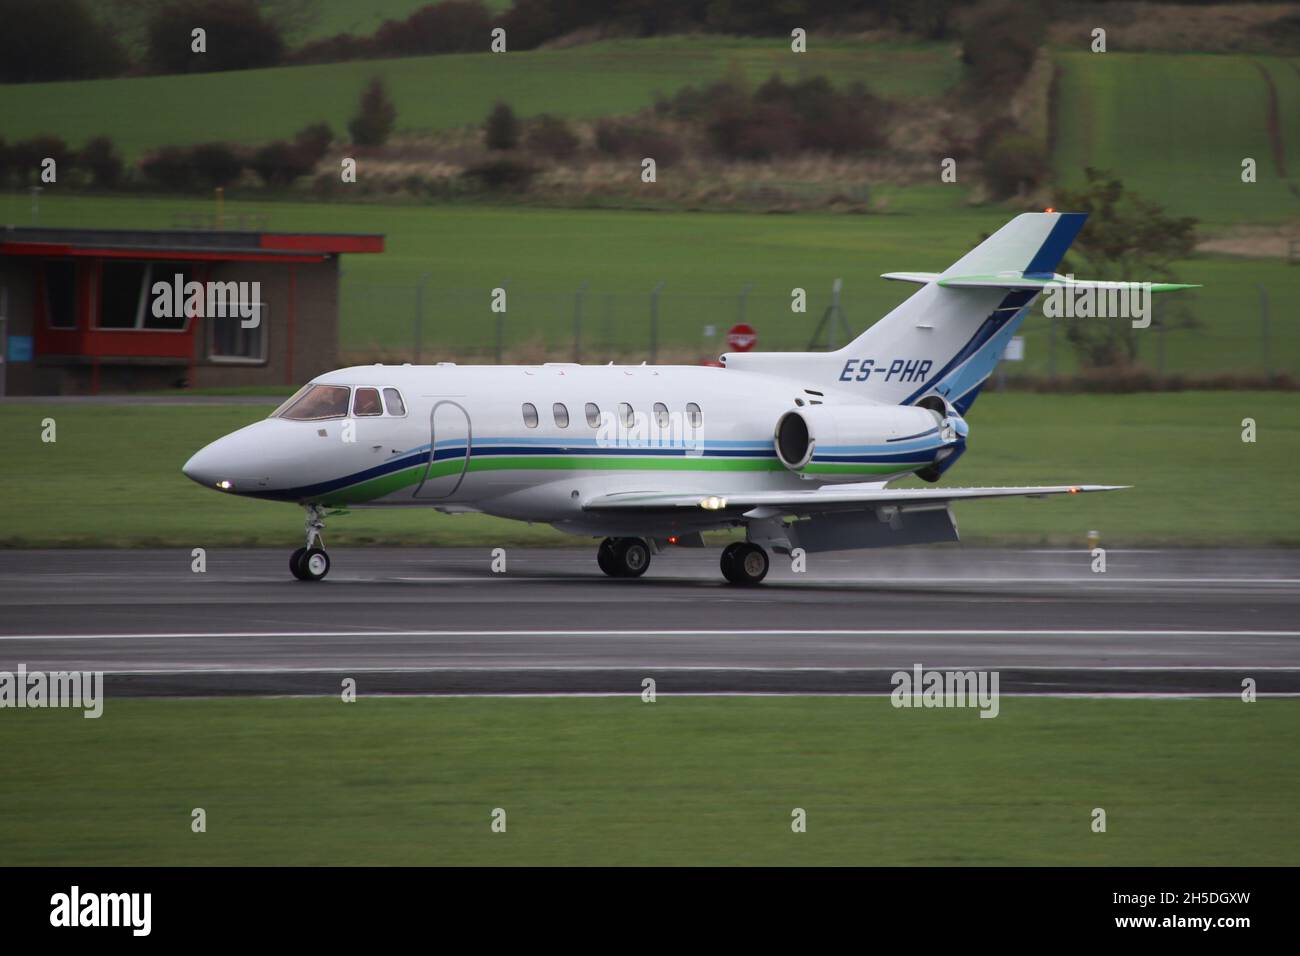 ES-PHR, a Hawker Beechcraft 750 operated by Estonian charter specialists Panaviatic, at Prestwick International Airport in Ayrshire, Scotland. The aircraft was in Scotland to bring delegates to the COP26 climate change conference being held in nearby Glasgow. Stock Photo